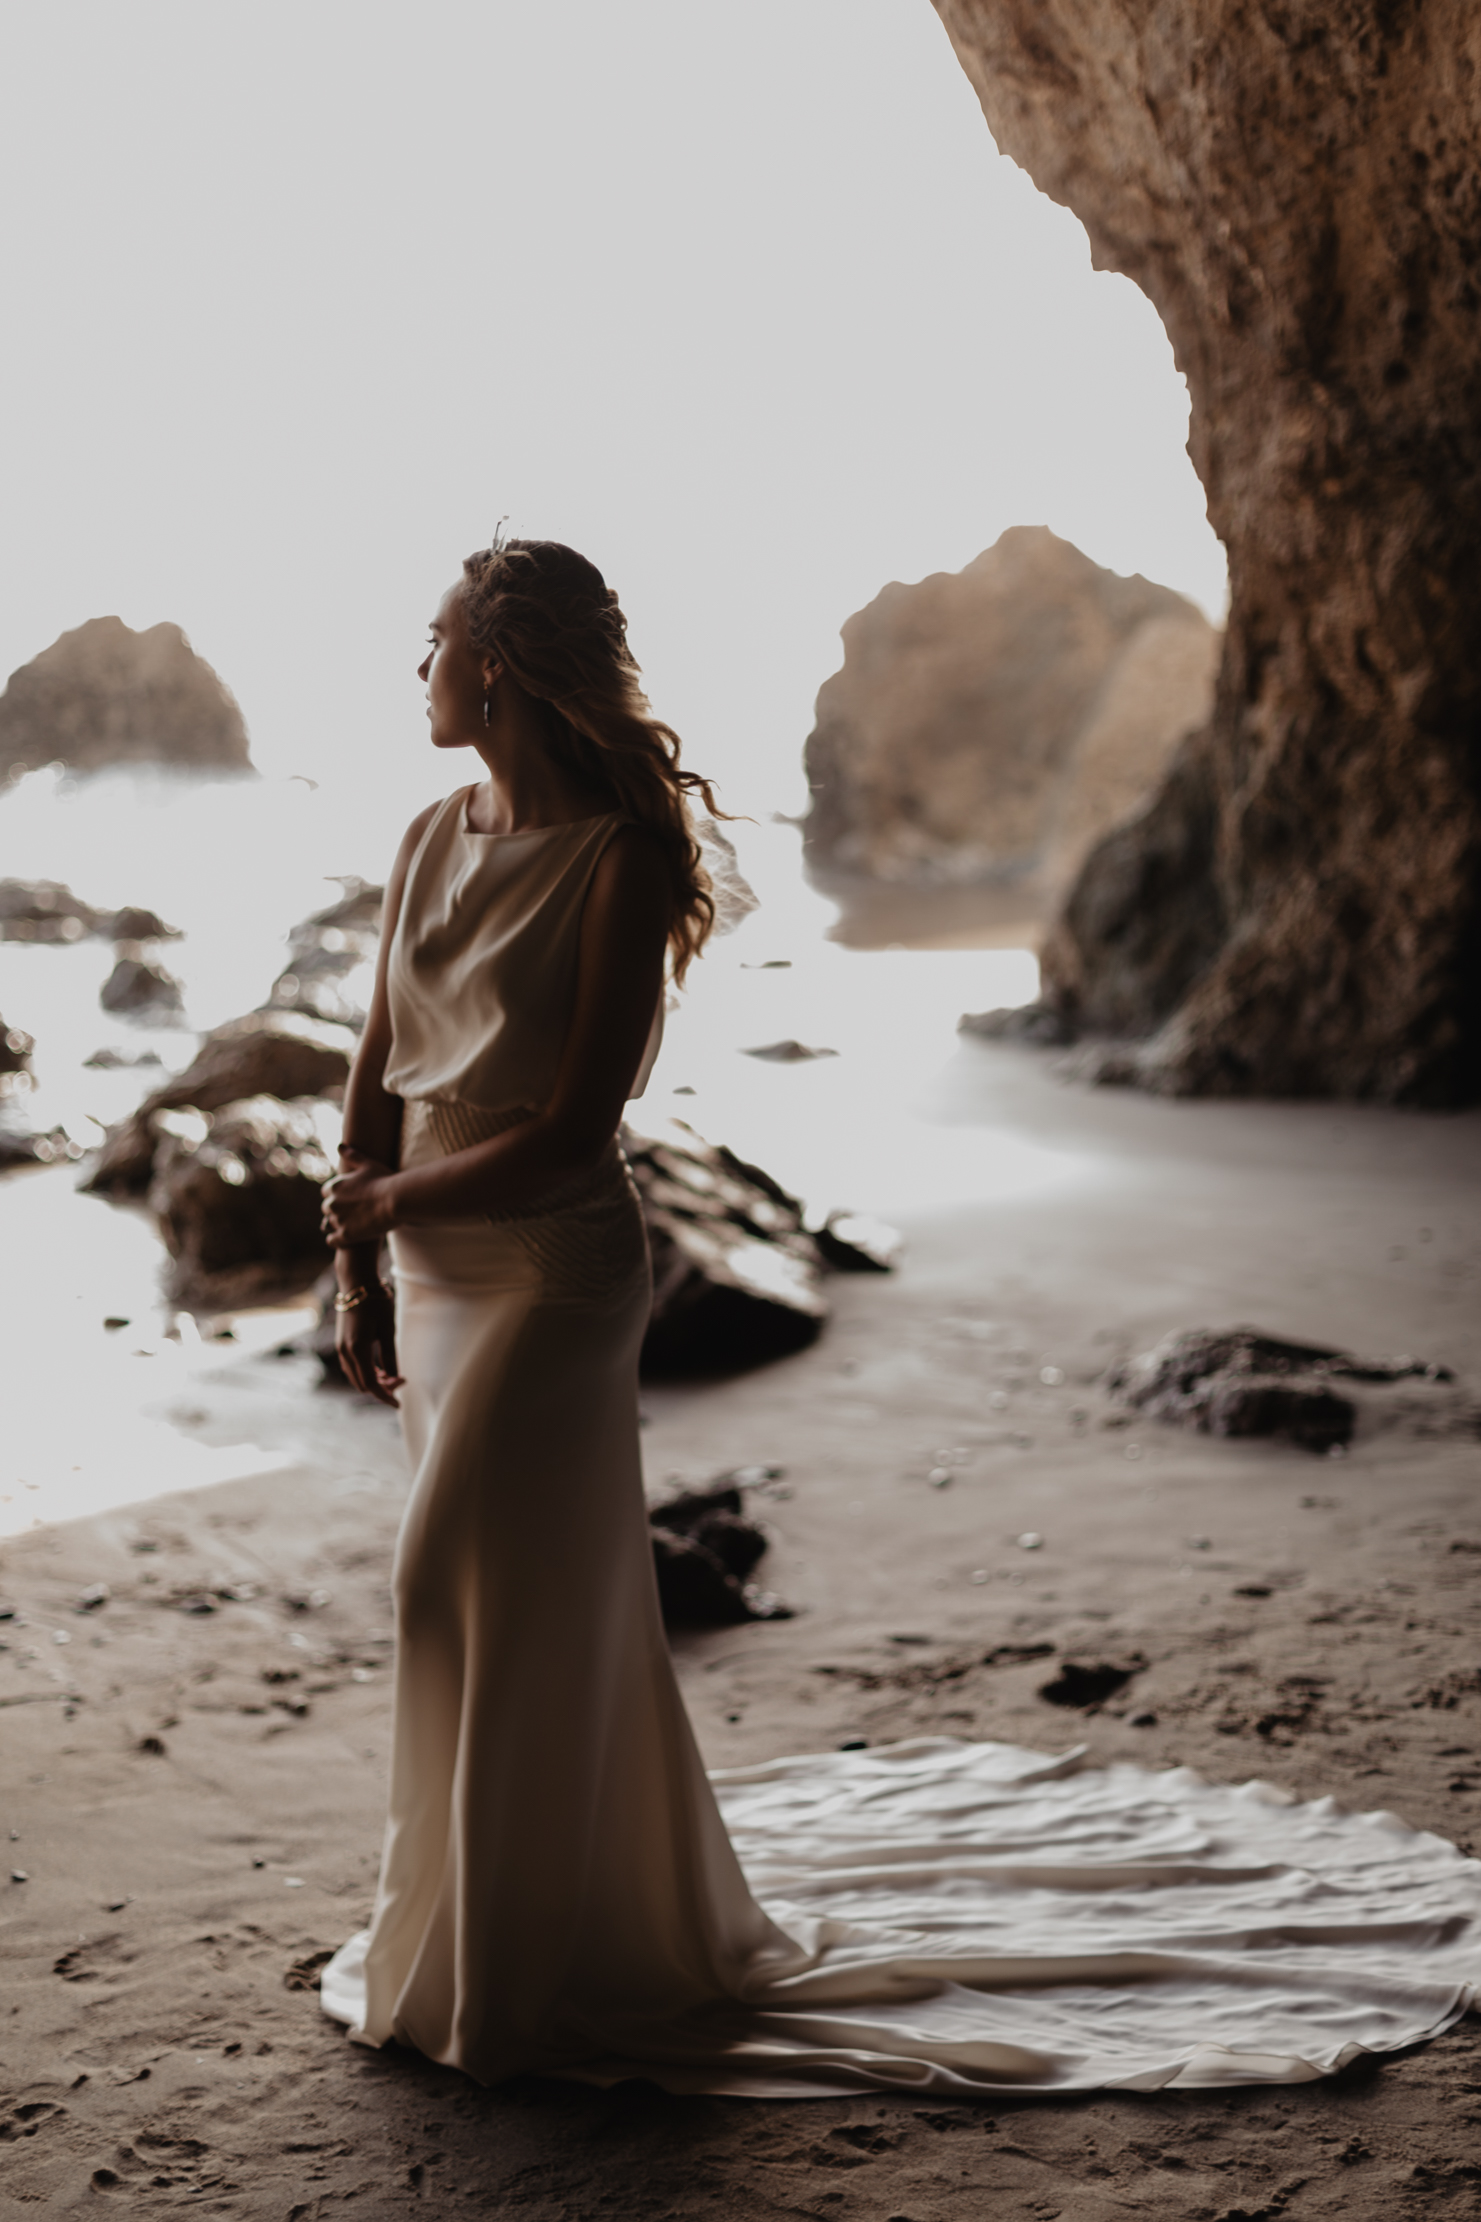 The archived Heathe wedding dress style by Edith Elan photographed at El Matador State Beach in Malibu California